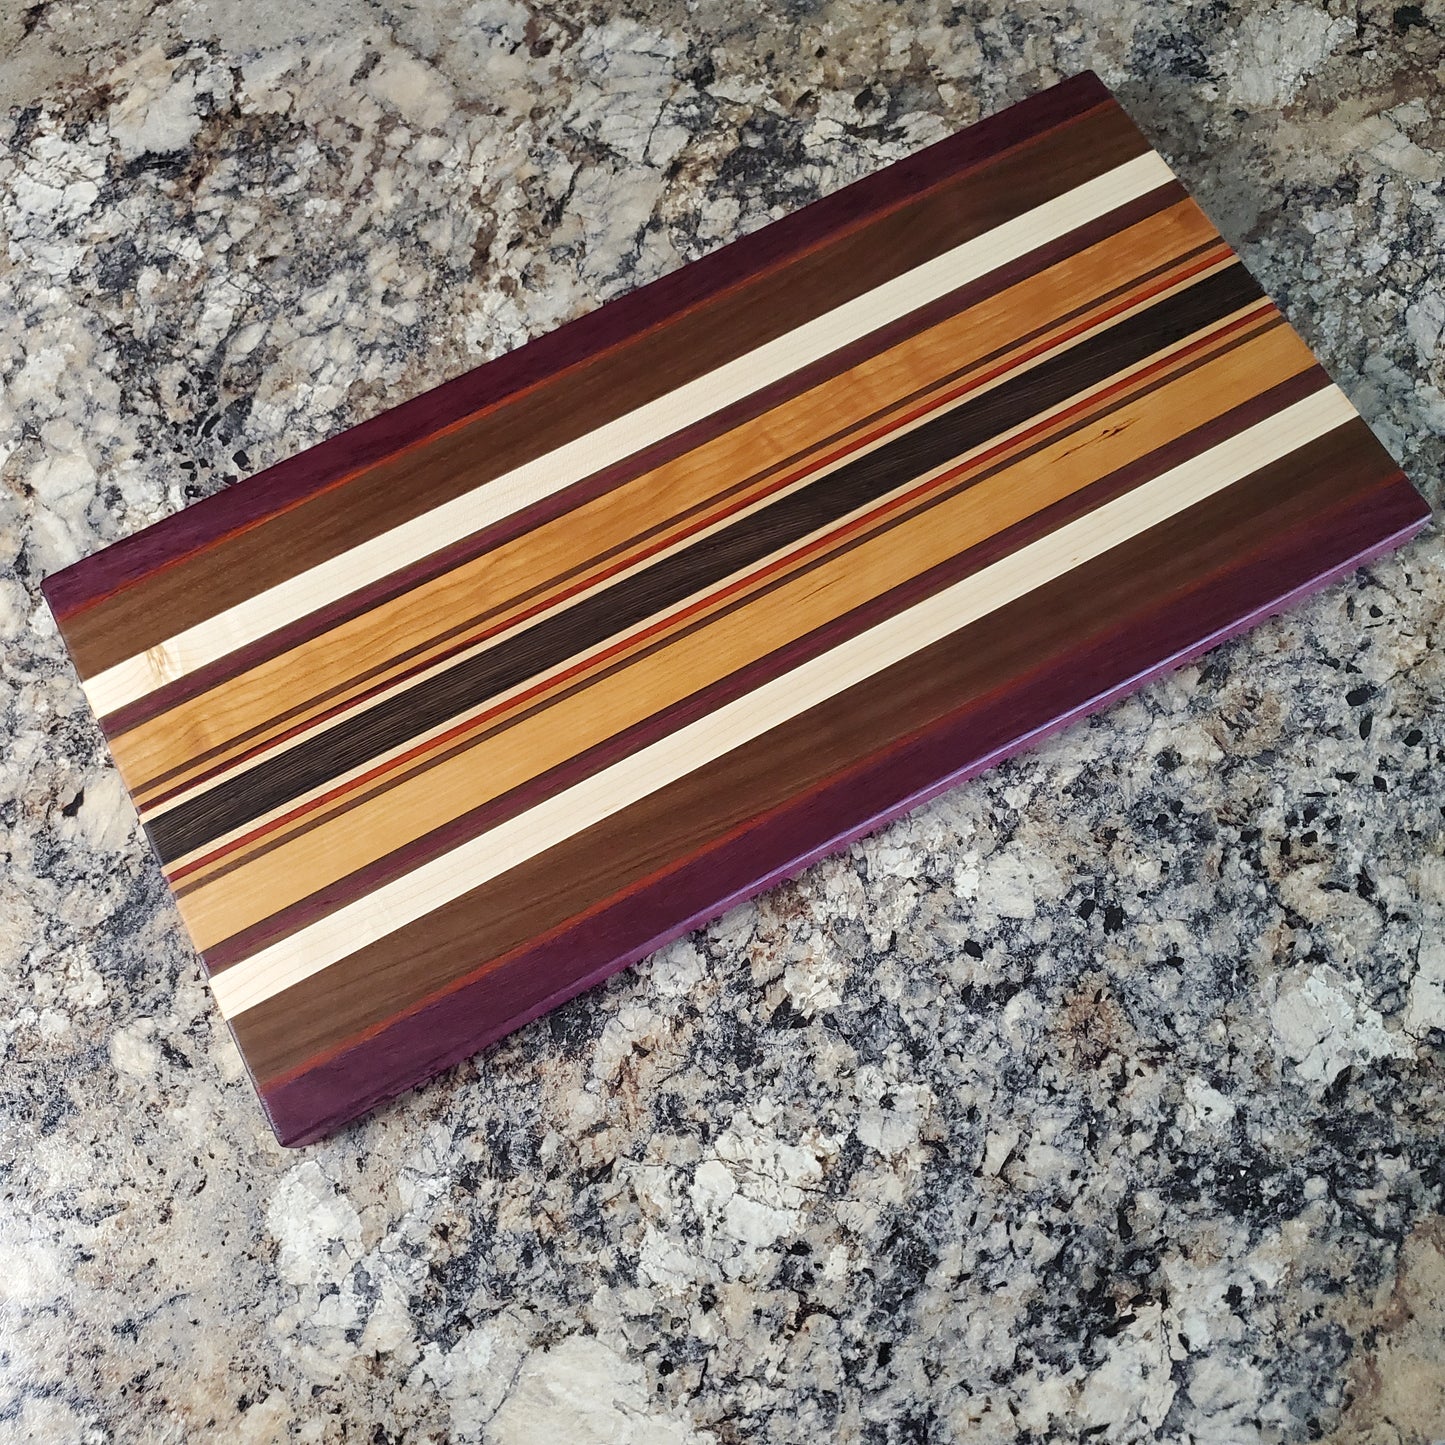 Signature Series Royalty cutting board made from maple, walnut, cherry, padauk, purple heart, and wenge by Lone Wolf Wood Designs